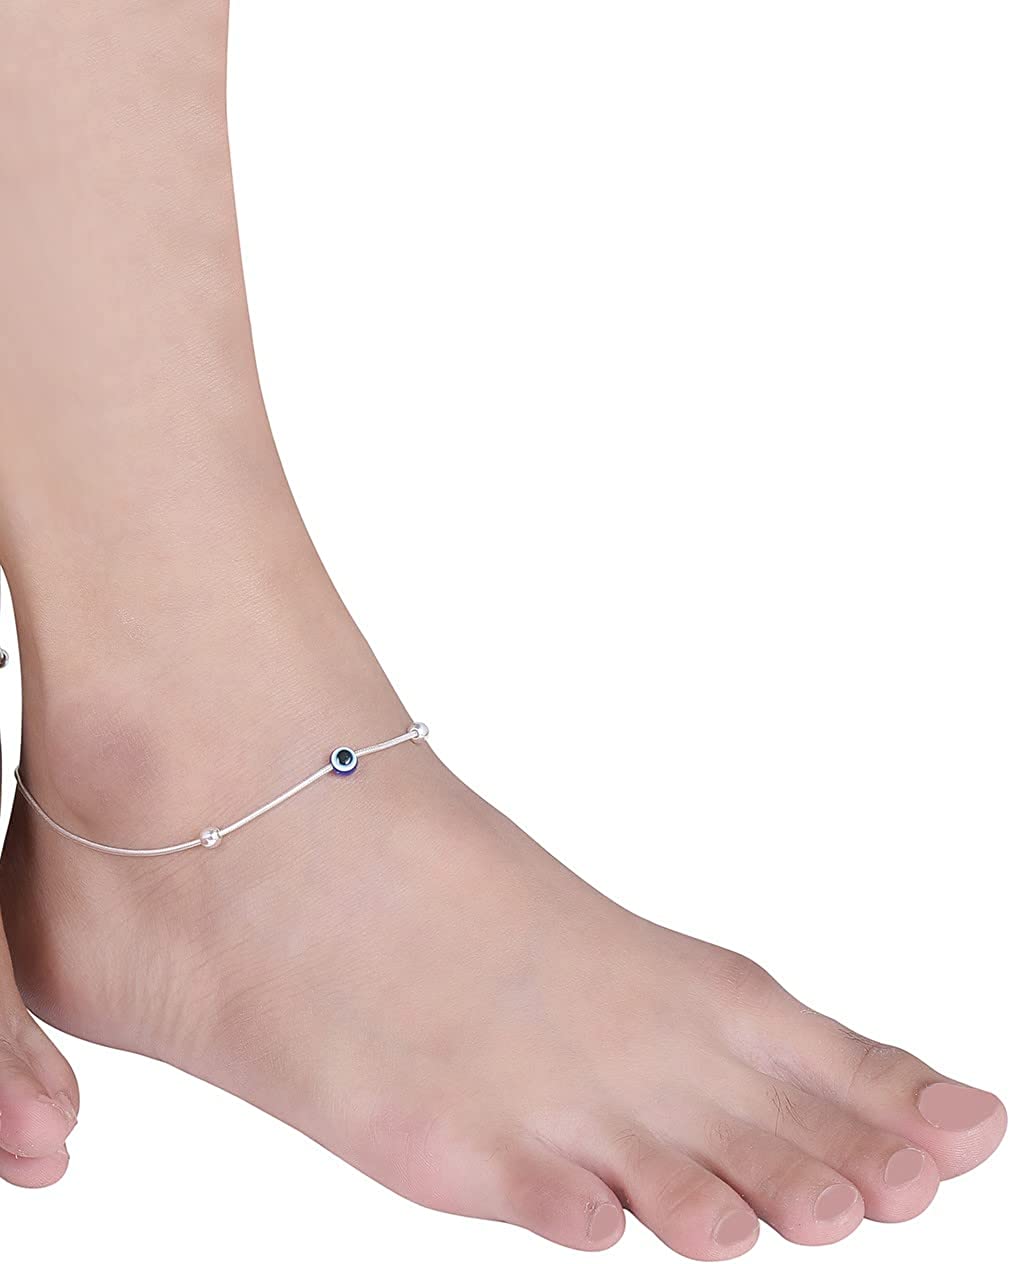 DAIDAISL Boho Style Star Anklet Fashion Multilayer Foot Chain Ankle Bracelet  For Women Beach Accessories price in UAE | Amazon UAE | kanbkam